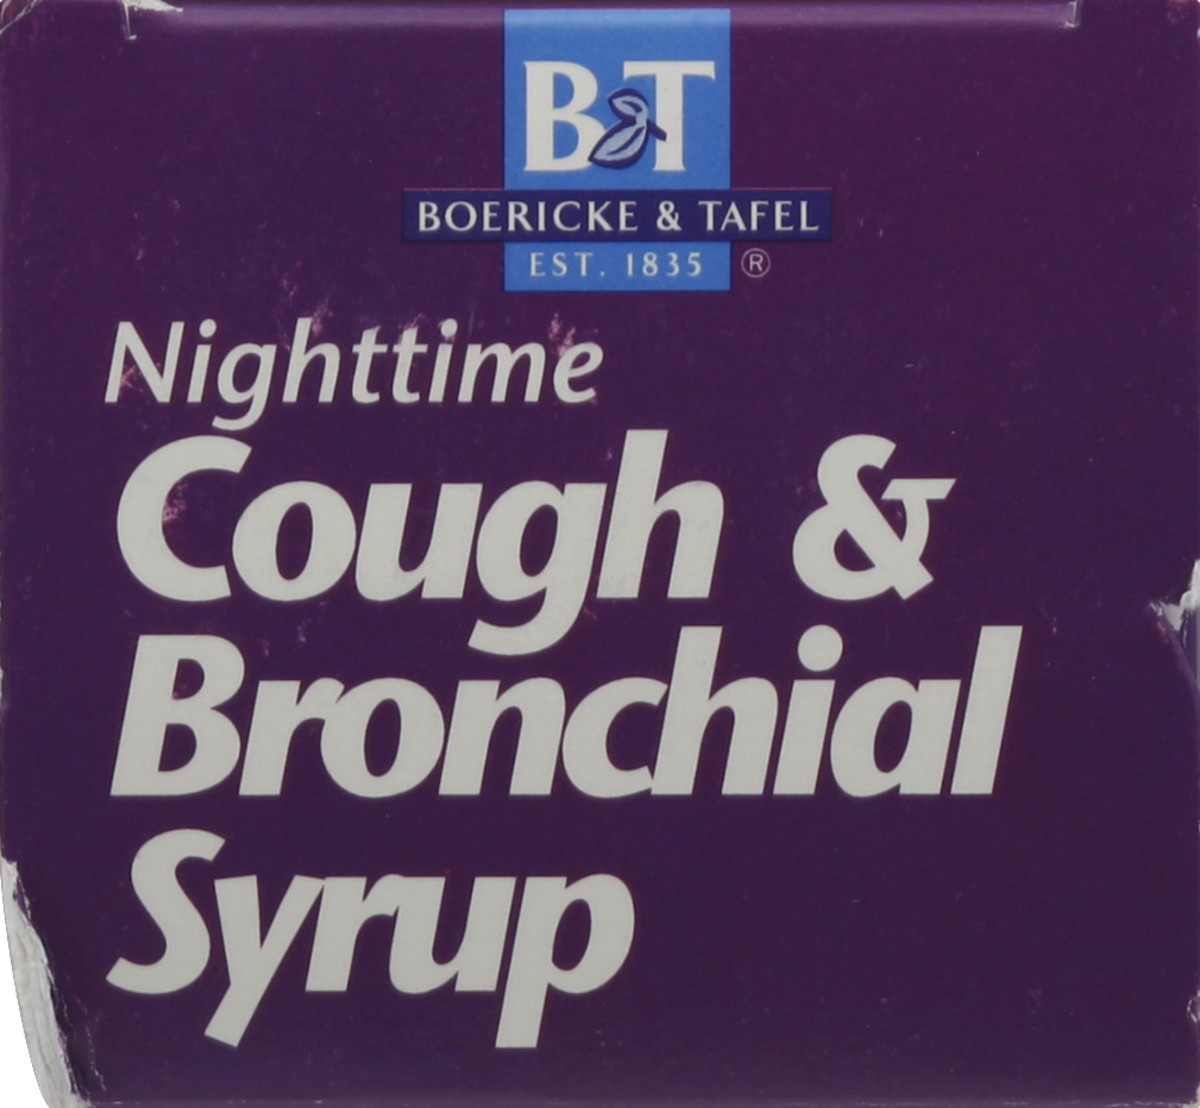 slide 5 of 6, Boericke & Tafel B&T Nighttime Cough & Bronchial Syrup for Restful Sleep Homeopathic, 8 Oz. (Nature's Way Brands), 8 fl oz